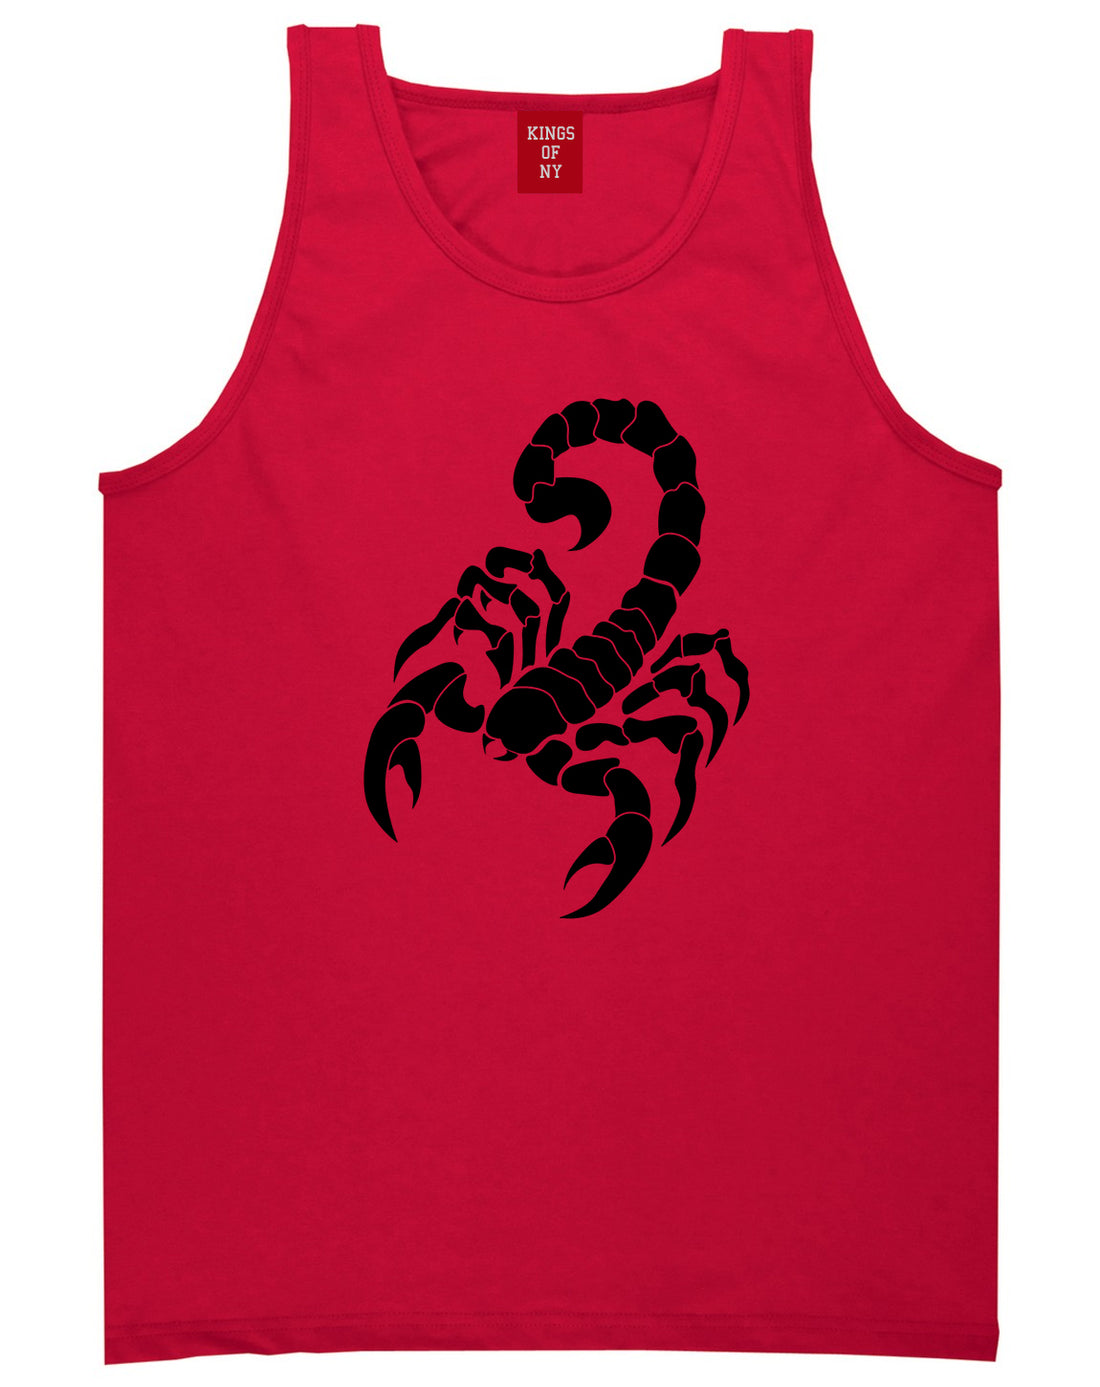 Scorpion Mens Tank Top Shirt Red by Kings Of NY